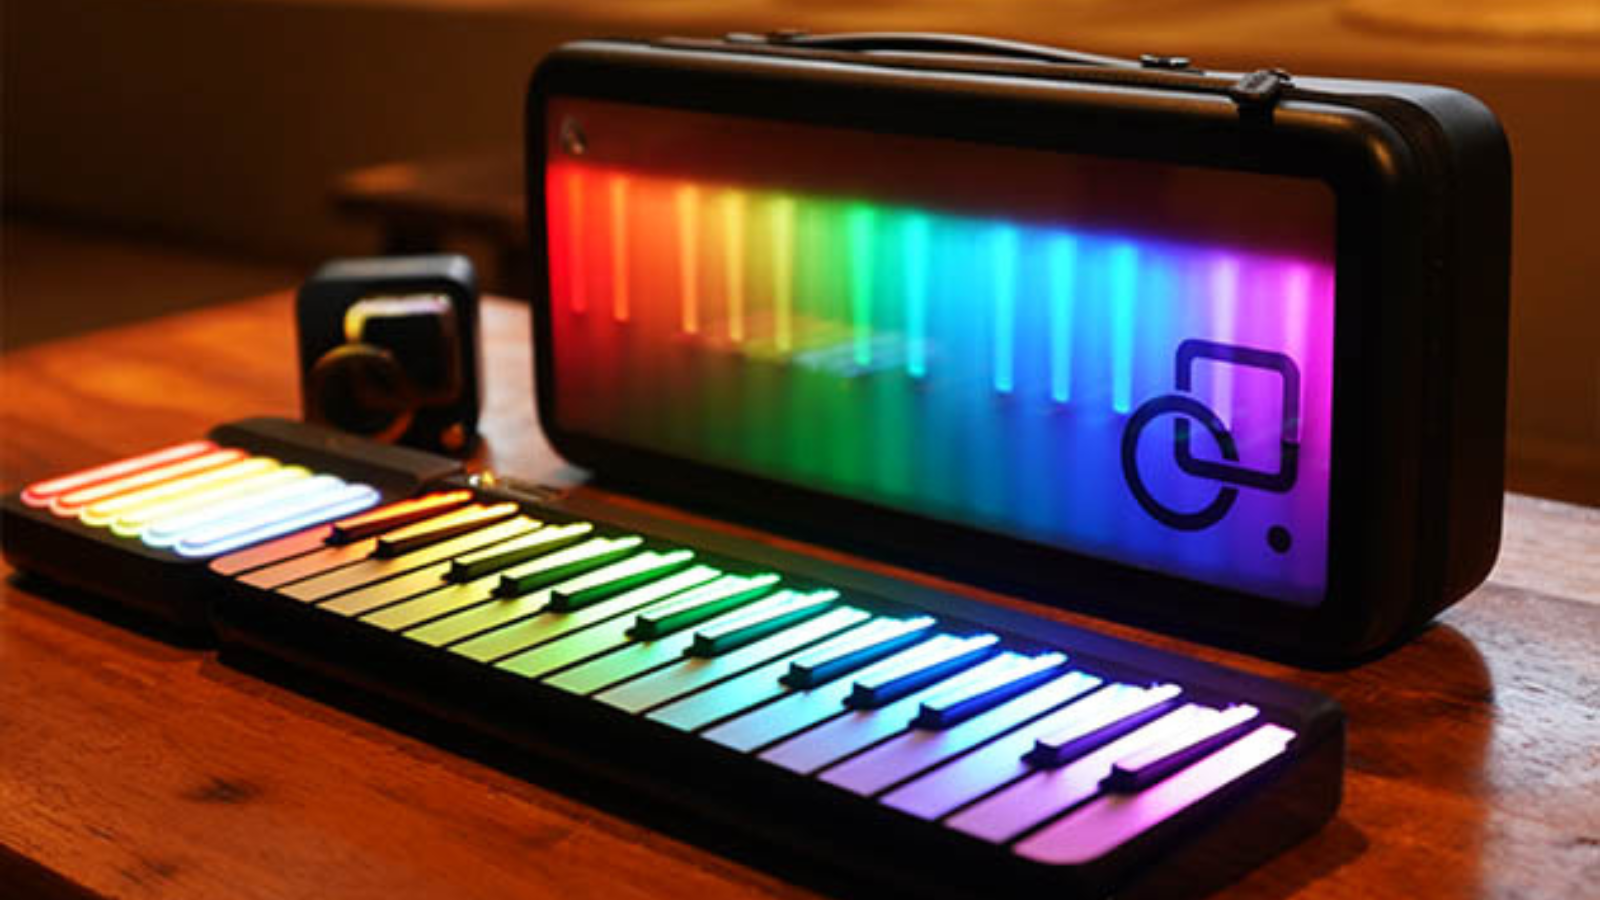 popupiano portable keyboard lit up with rainbow lights